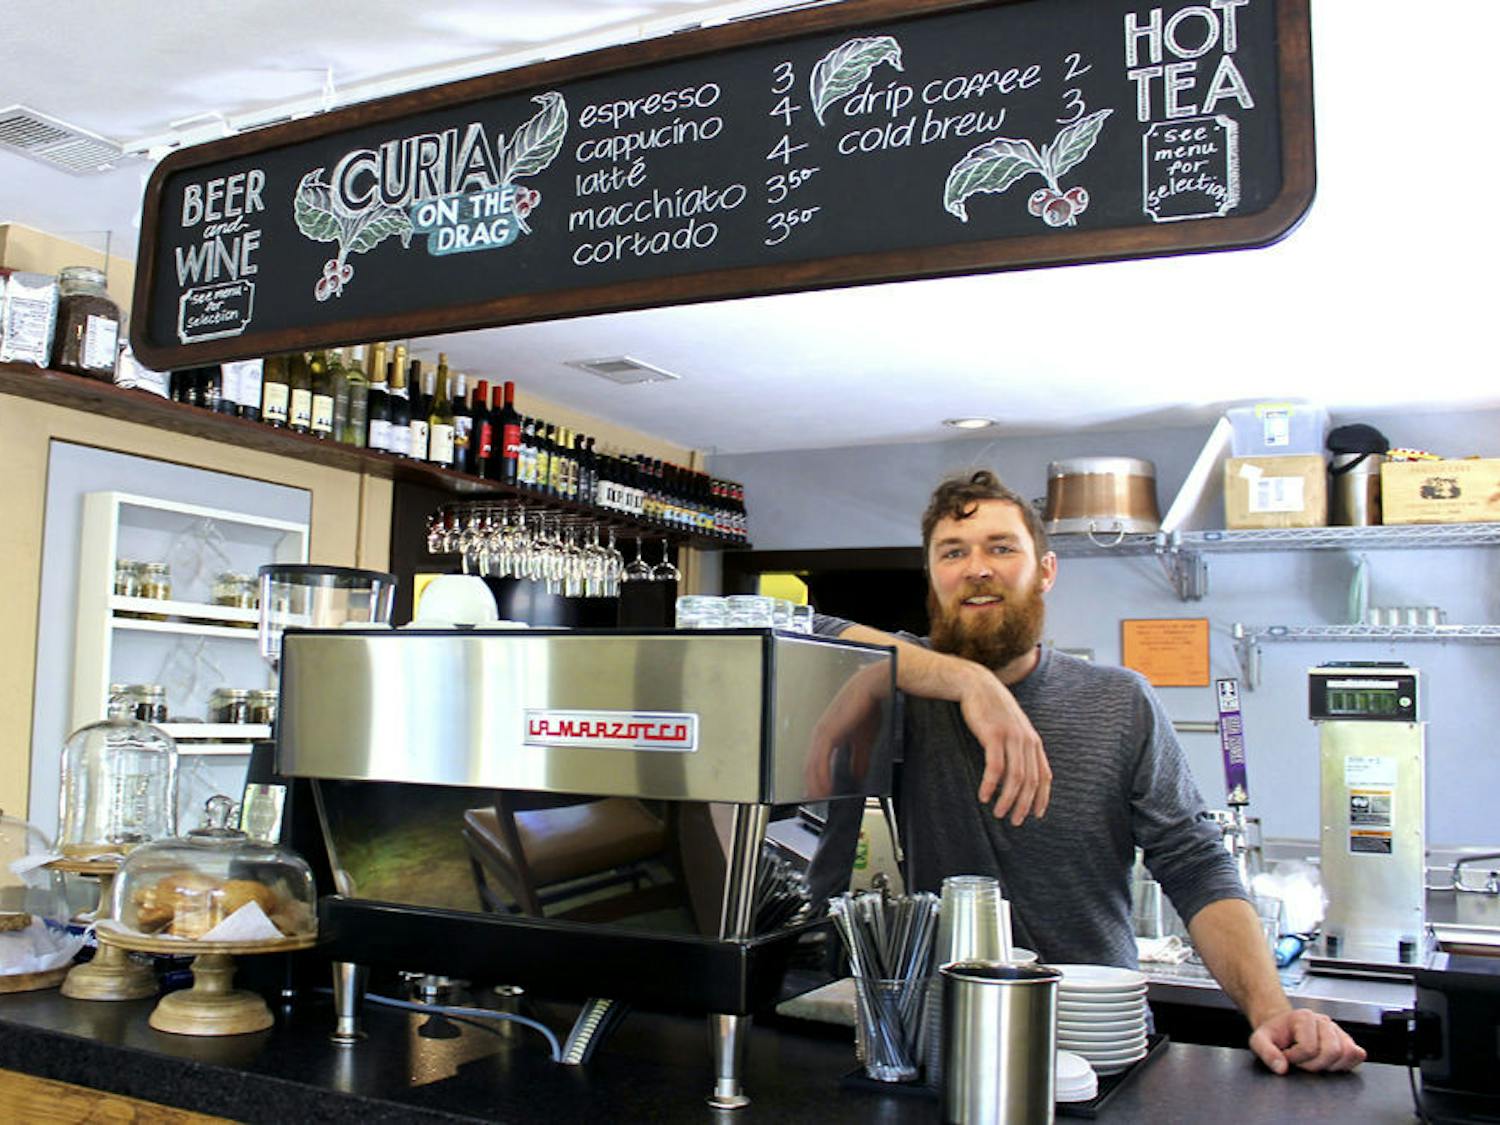 Zack Kennedy, the 31-year-old operating director for Curia on the Drag, poses for a photo inside the coffee shop located on 2029 NW 6th St. “We want to be a destination spot for the community,” Kennedy said. “We want this to be a spot where you can come and hang.”